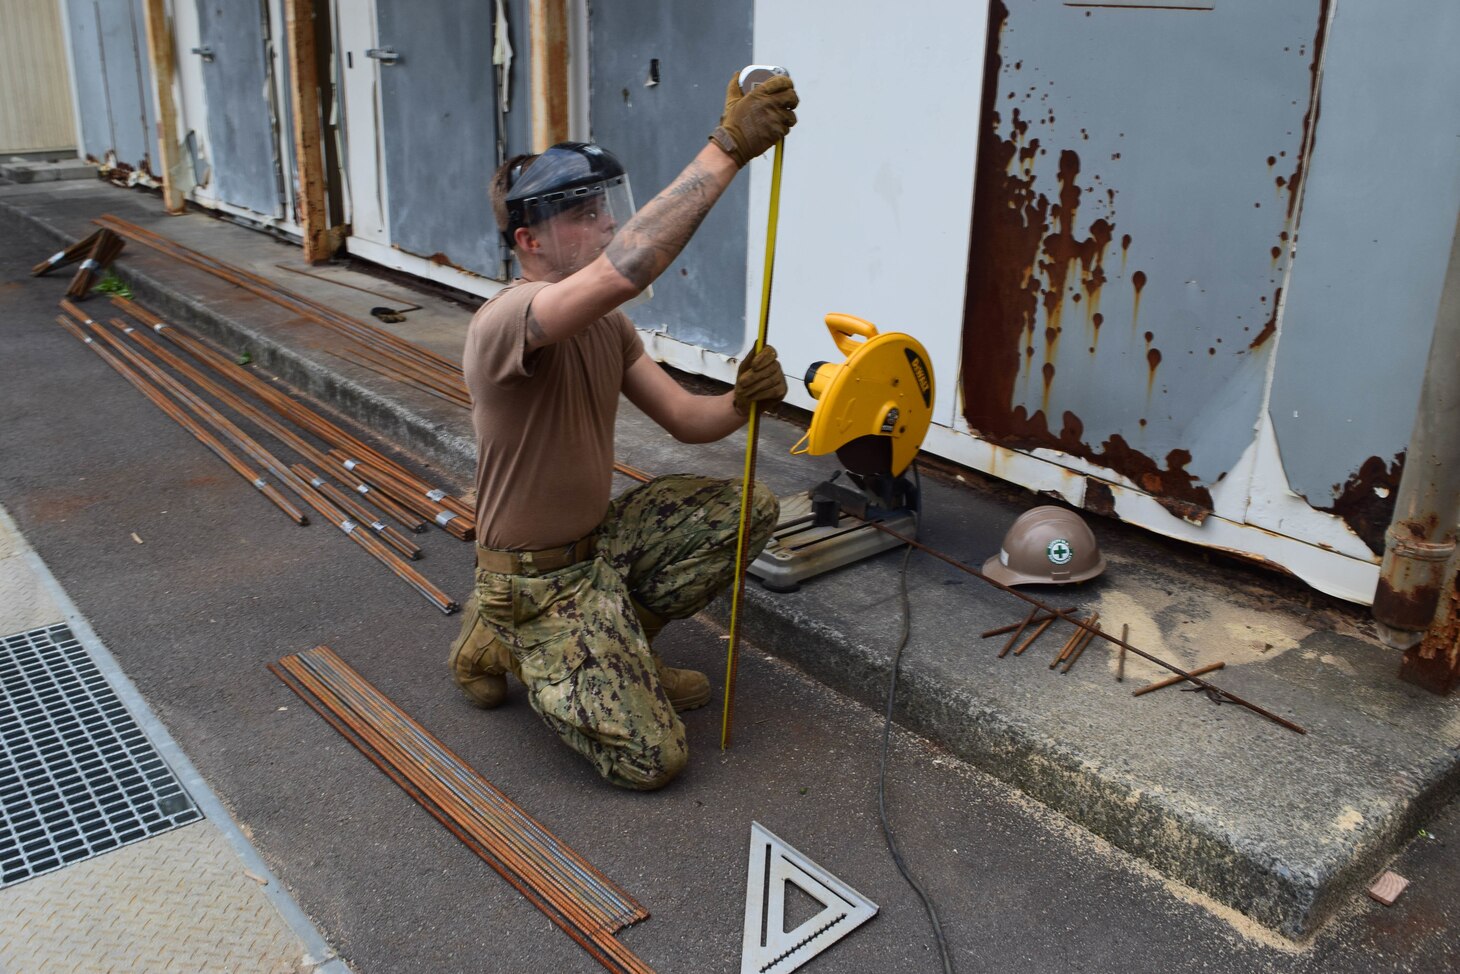 191025-N-EO124-0024 IWAKUNI, Japan (Oct. 25, 2019) Steelworker Constructionman Garrett Wells, from Yale, Michigan, deployed with Naval Mobile Construction Battalion (NMCB) 5’s Detail Iwakuni, prefabricates reinforced steel for an environmental trash enclosure project.  NMCB-5 is deployed across the Indo-Pacific region conducting high-quality construction to support U.S. and partner nations to strengthen partnerships, deter aggression, and enable expeditionary logistics and naval power projection.